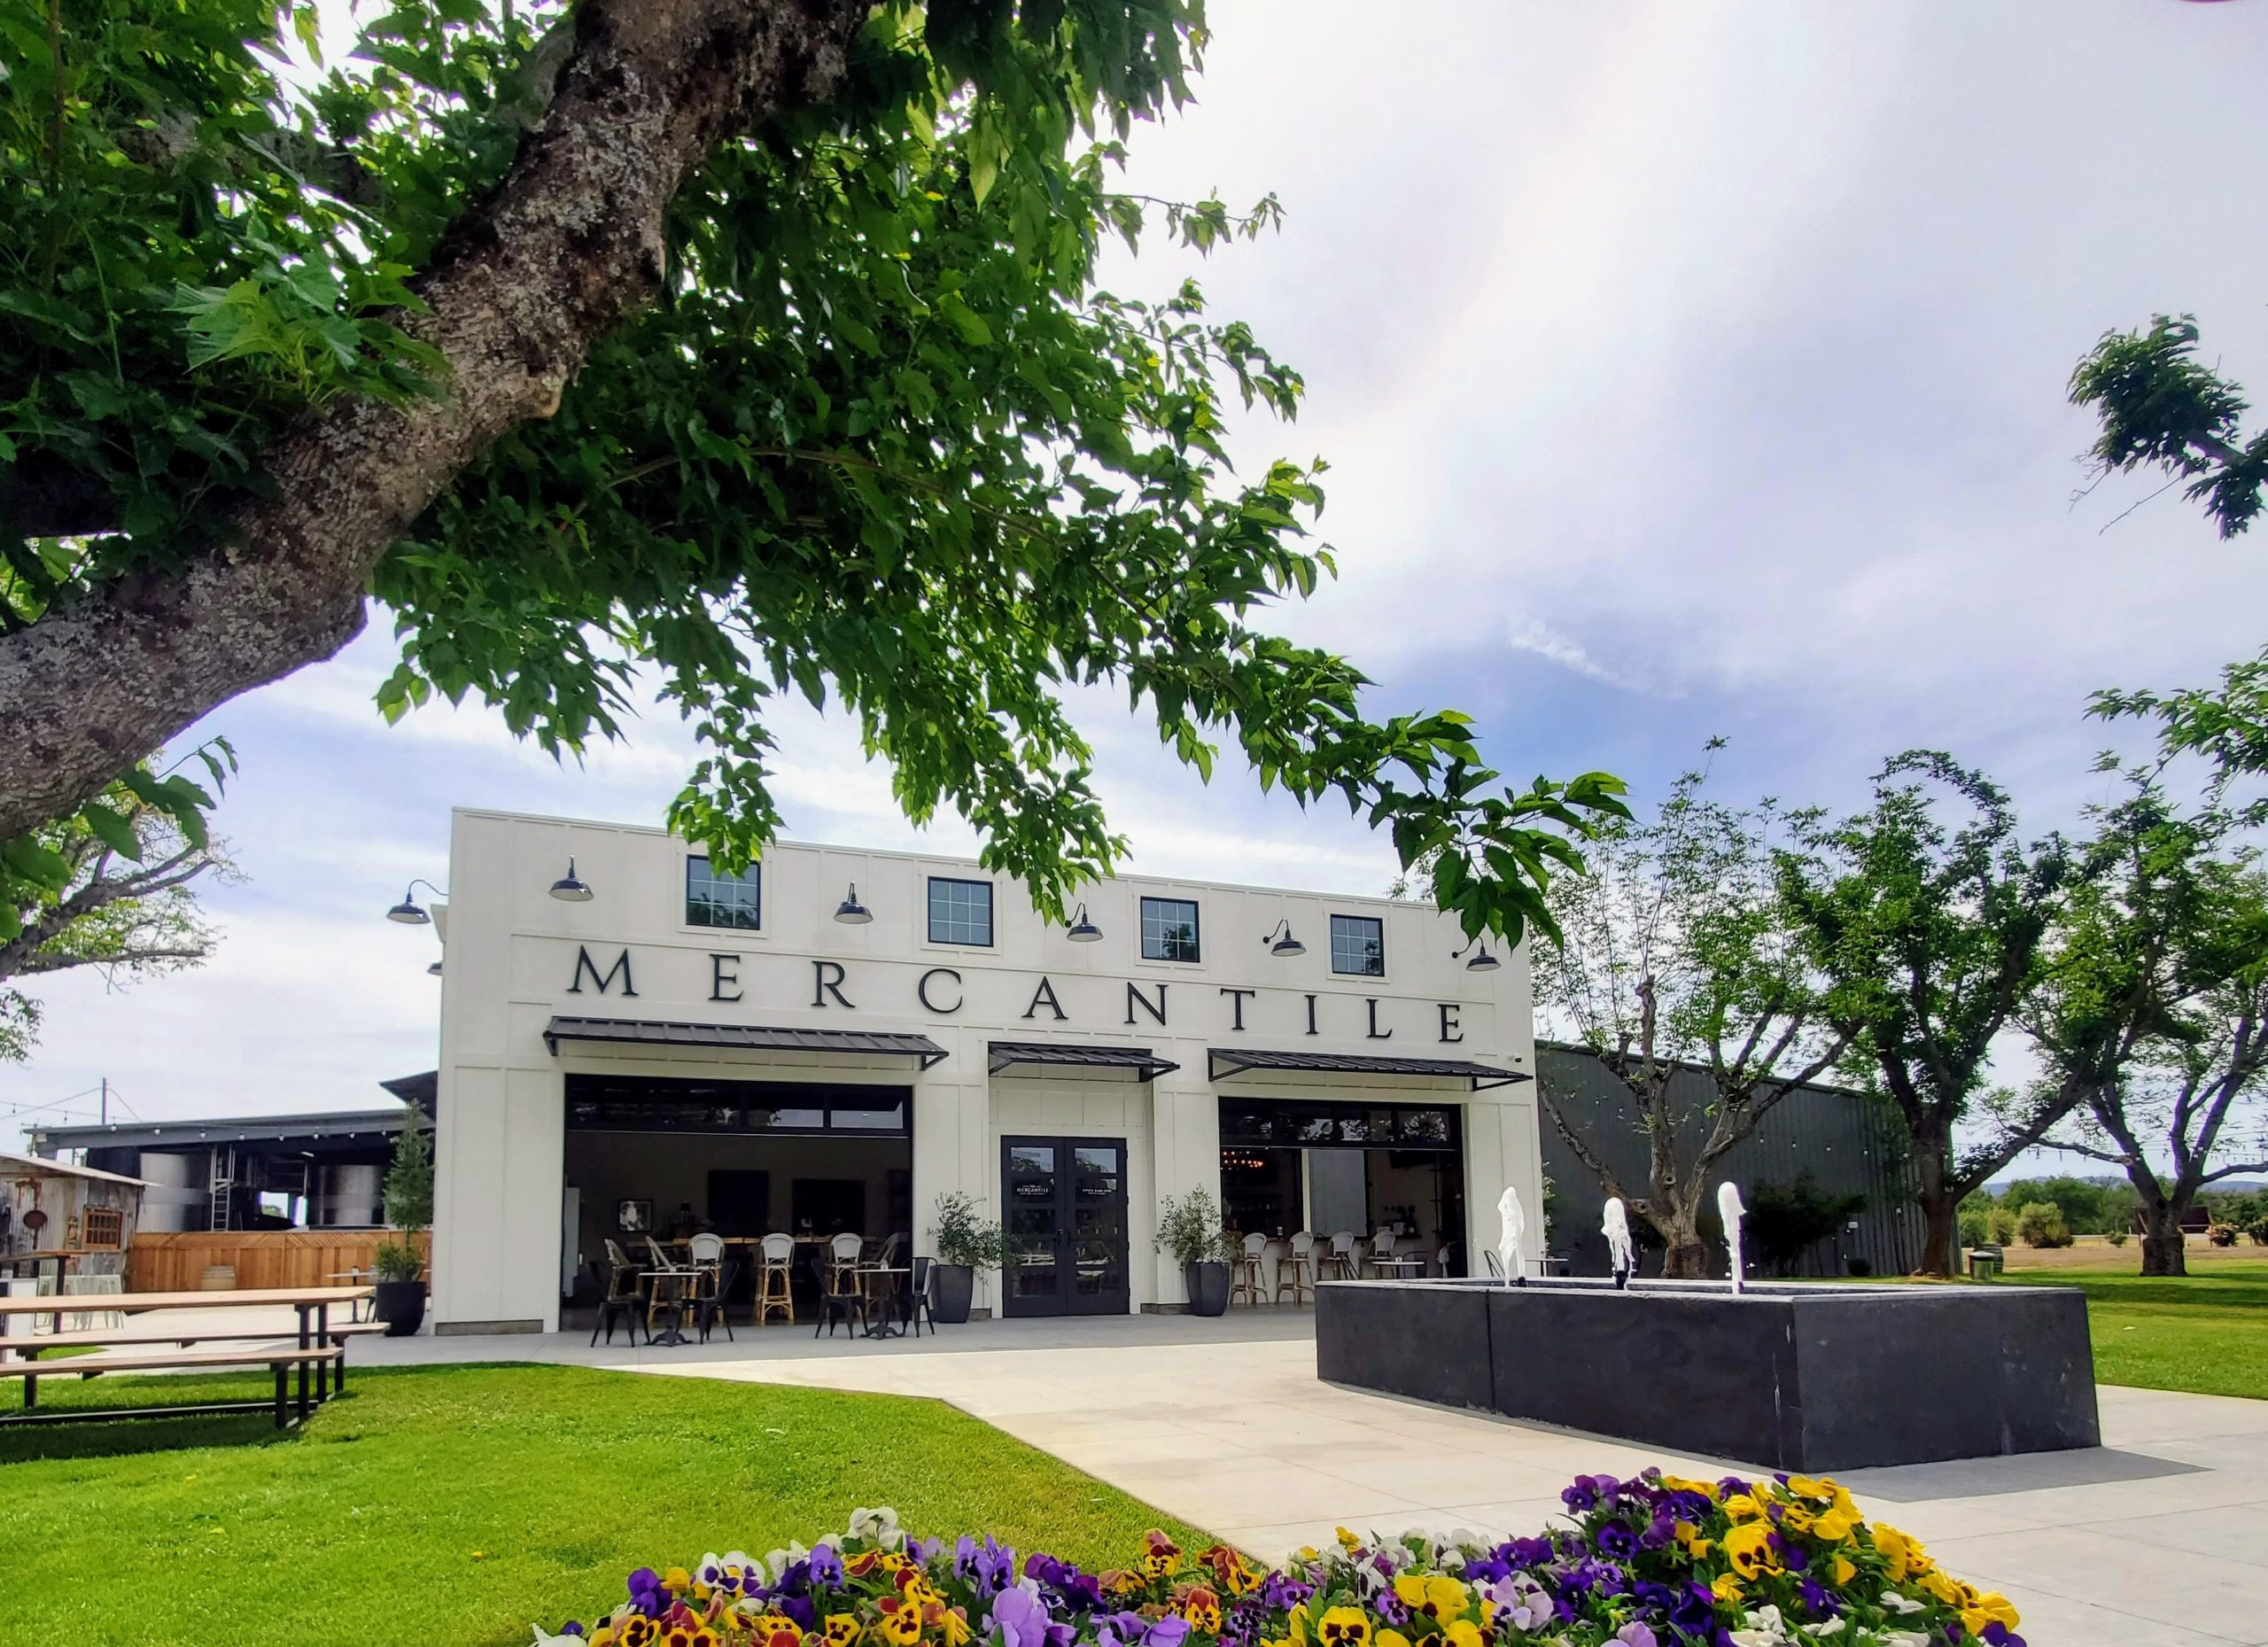 The Mercantile by Shannon Family of Wines